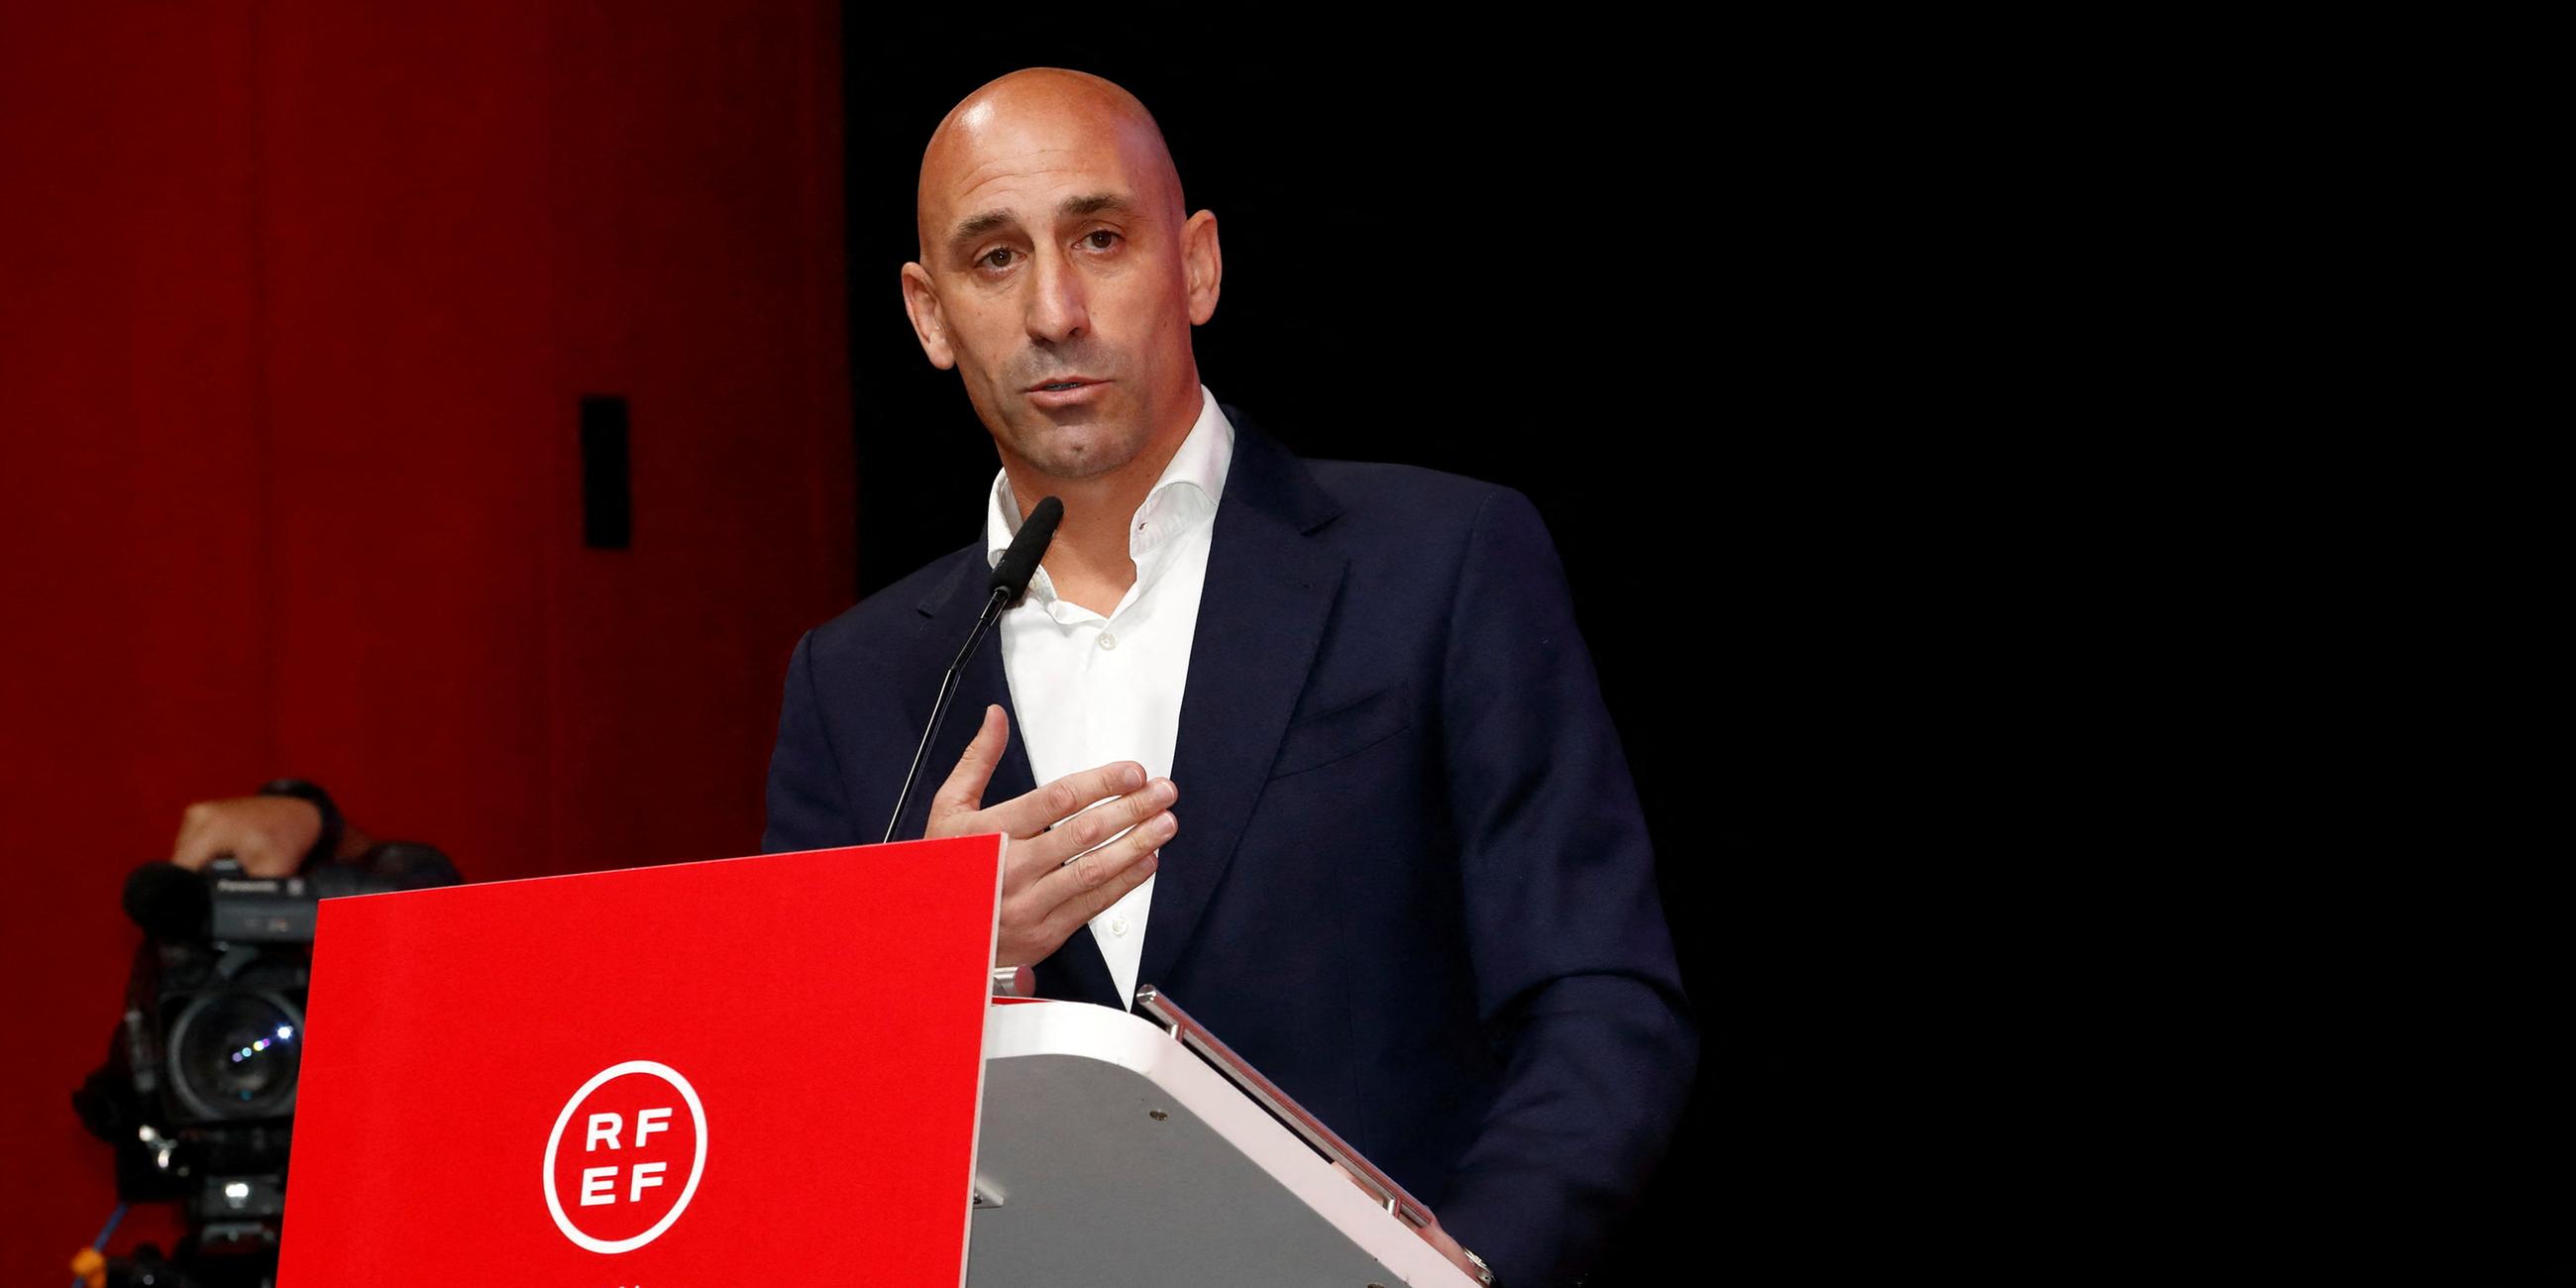 Spanish Soccer Federation Meeting - Ciudad Del Futbol Las Rozas, Las Rozas, Spain - August 25, 2023 President of the Royal Spanish Football Federation Luis Rubiales announces he will be staying as president during the meeting.